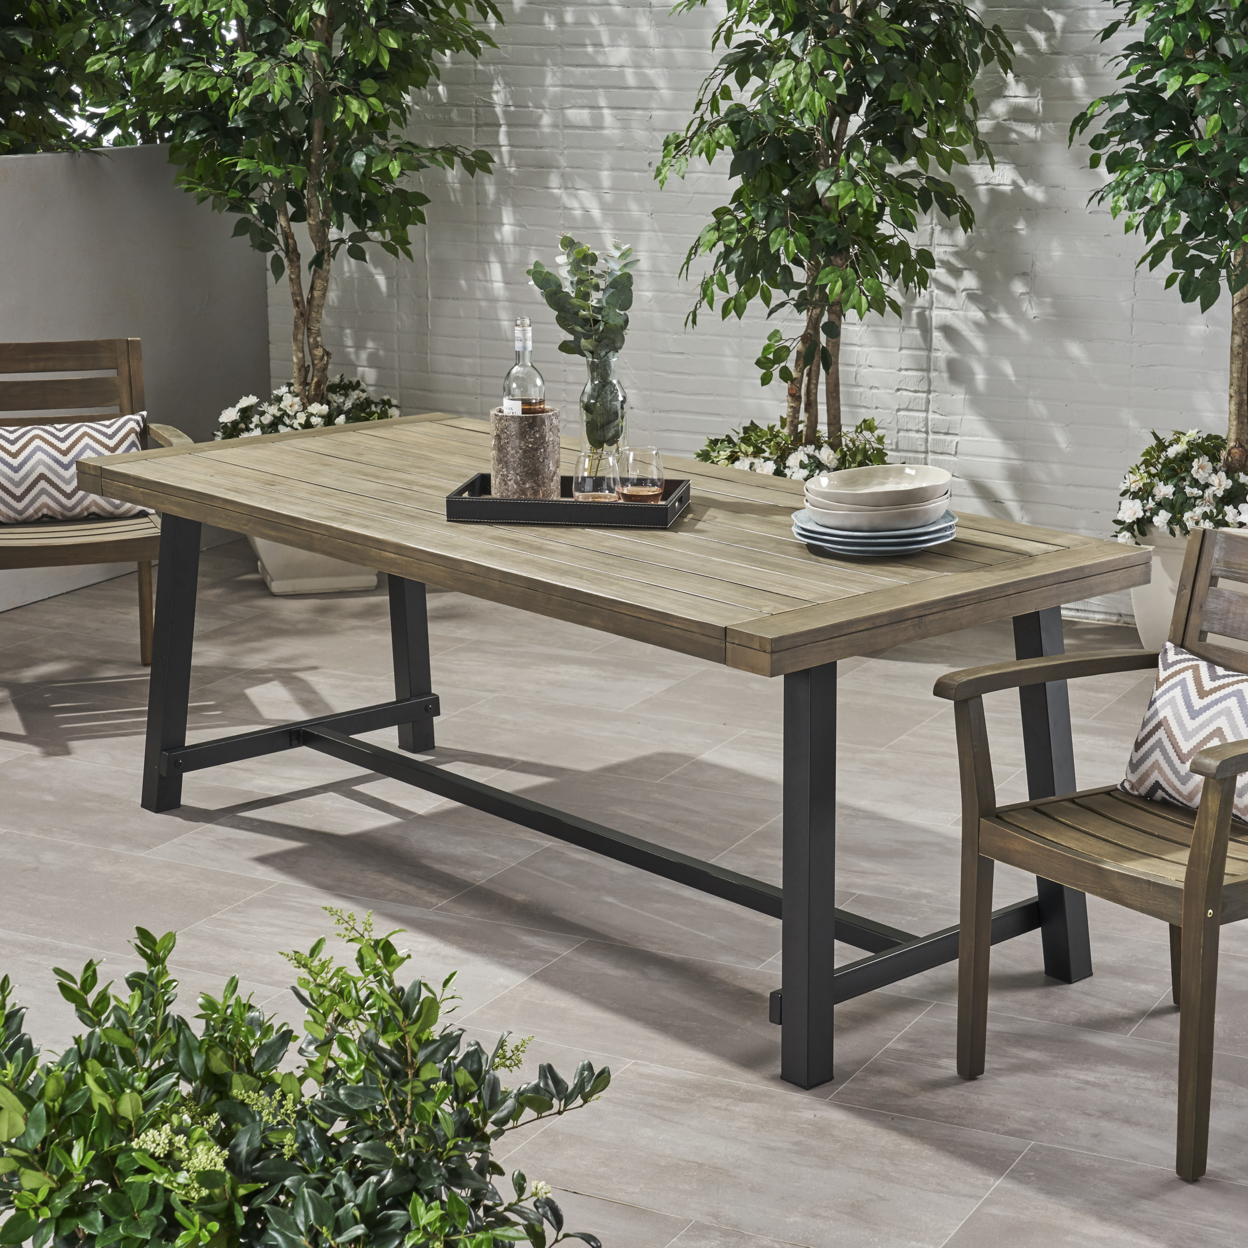 Beau Outdoor Eight Seater Wooden Dining Table - Gray Finish + Black Finish